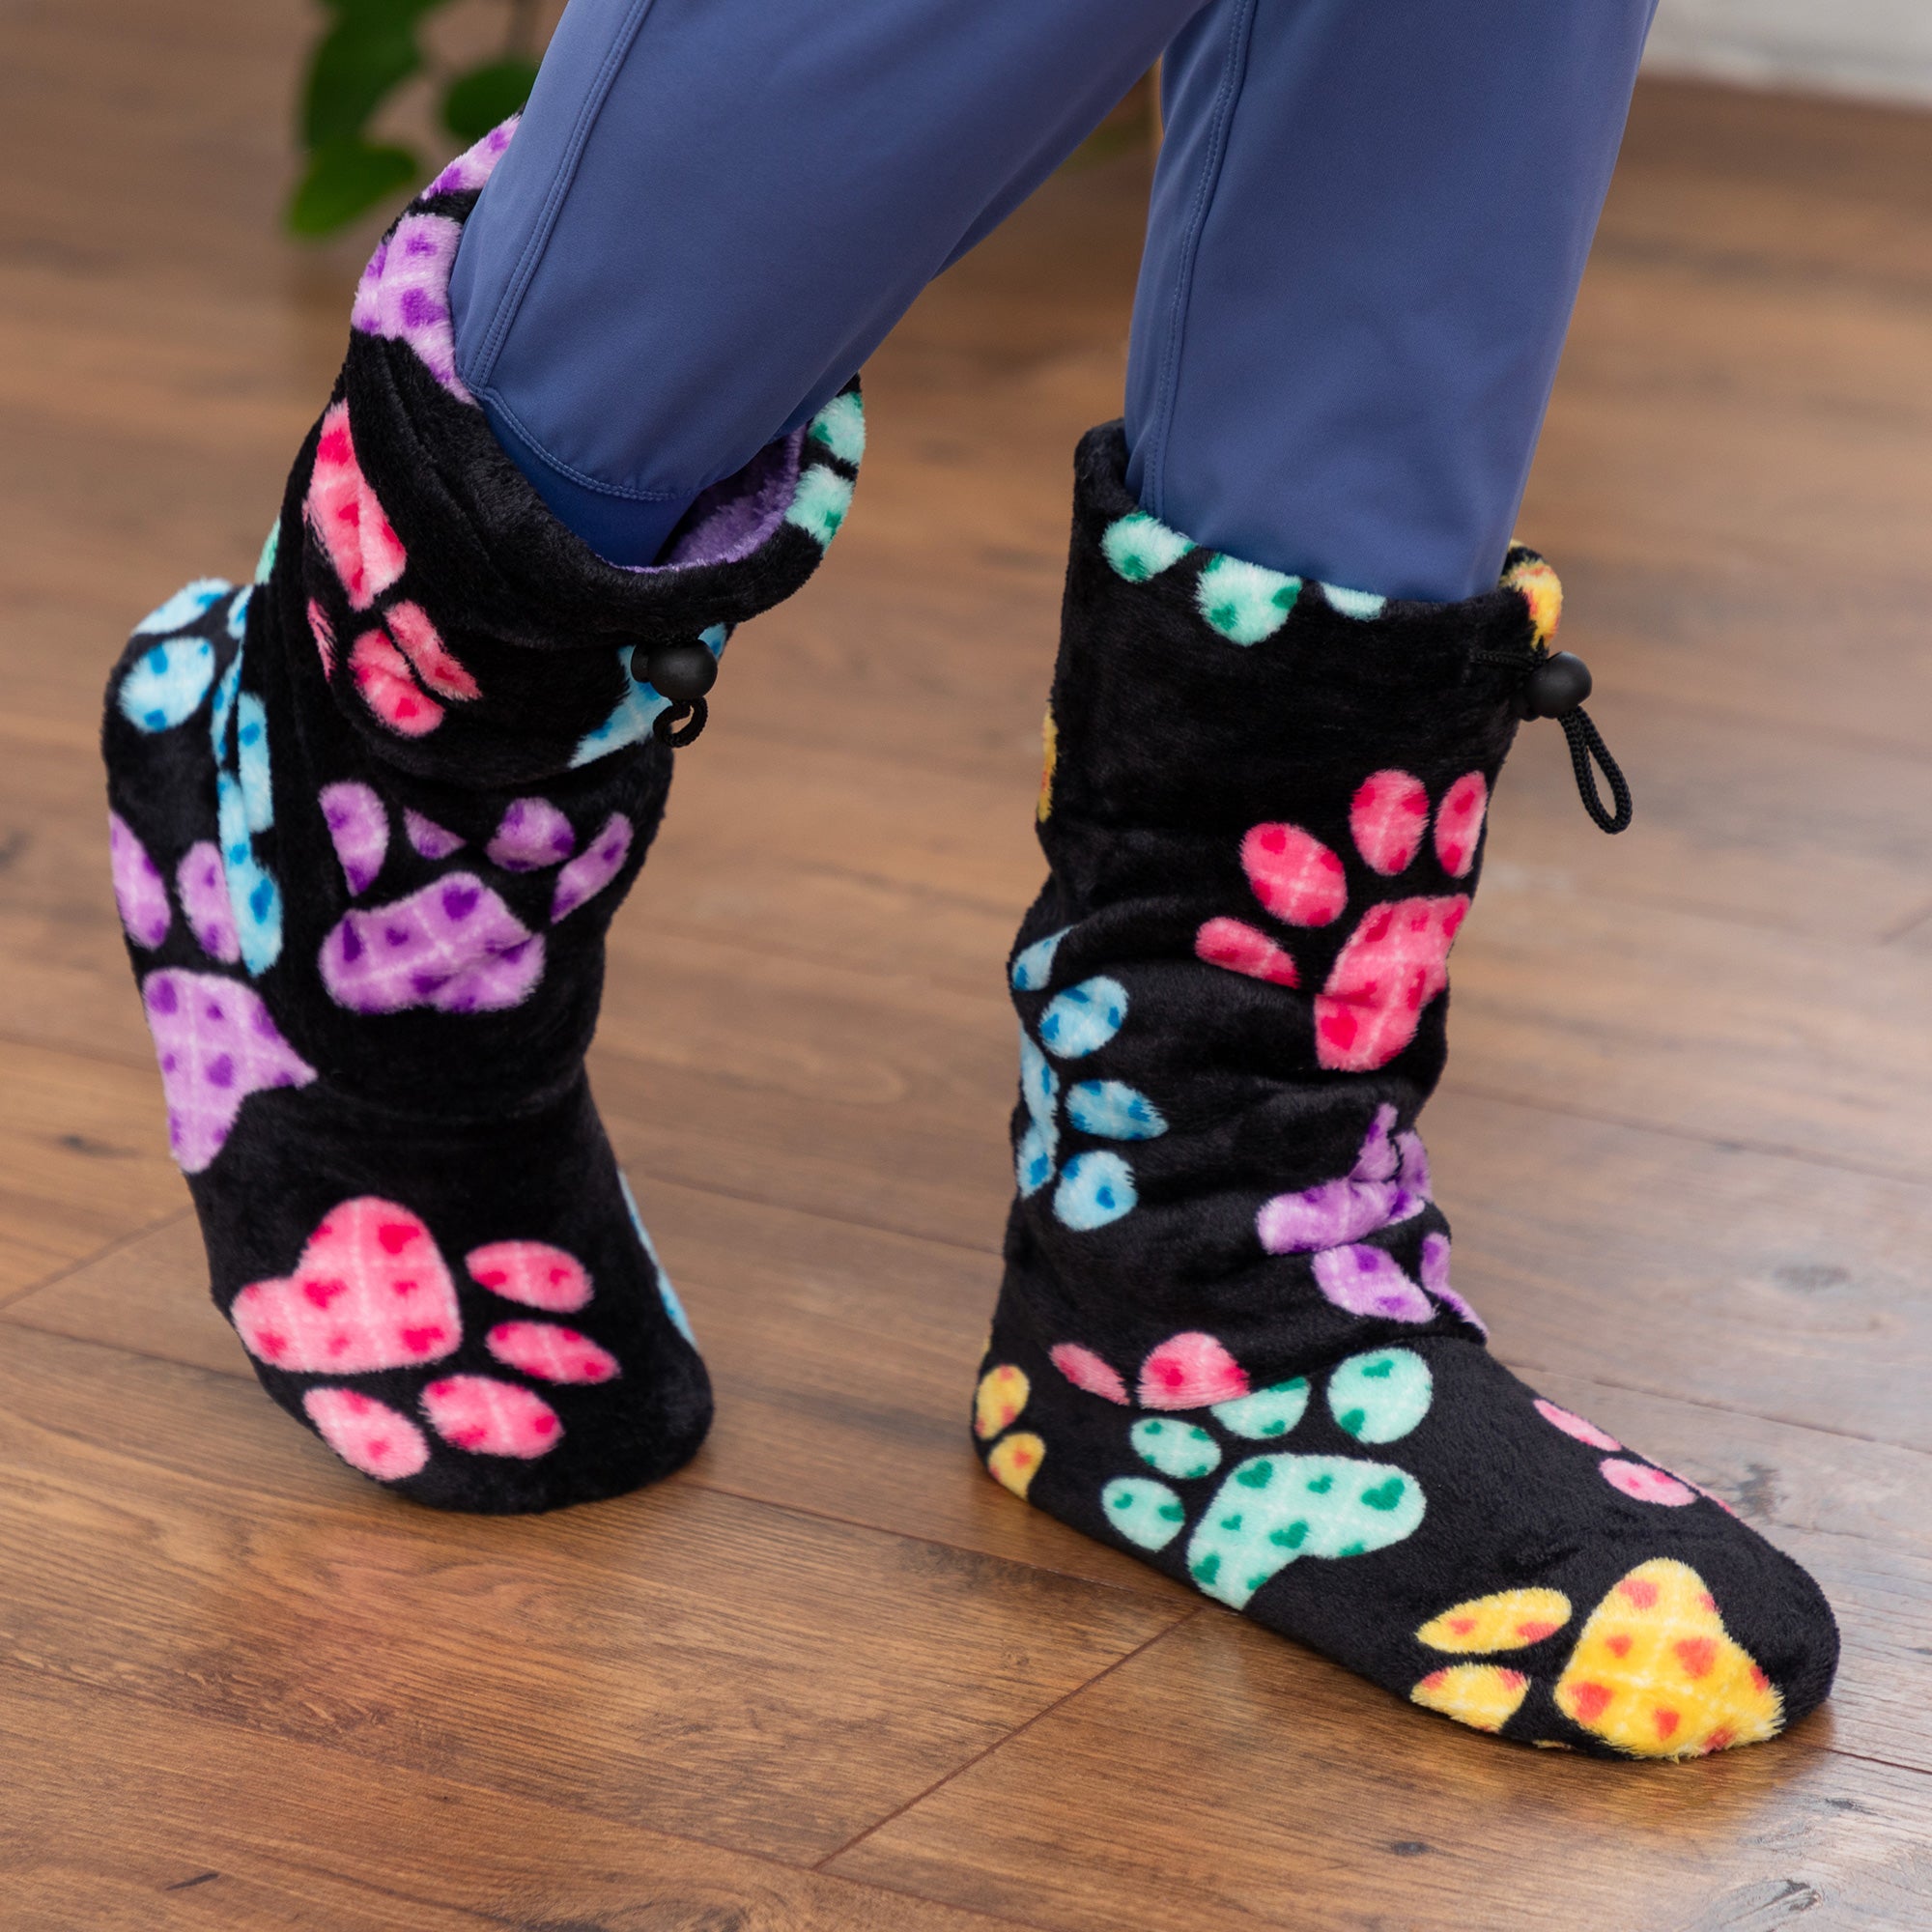 Super Cozy™ Deluxe Paw Non-Slip Toggle Slipper Booties - Argyle Paws - M/L